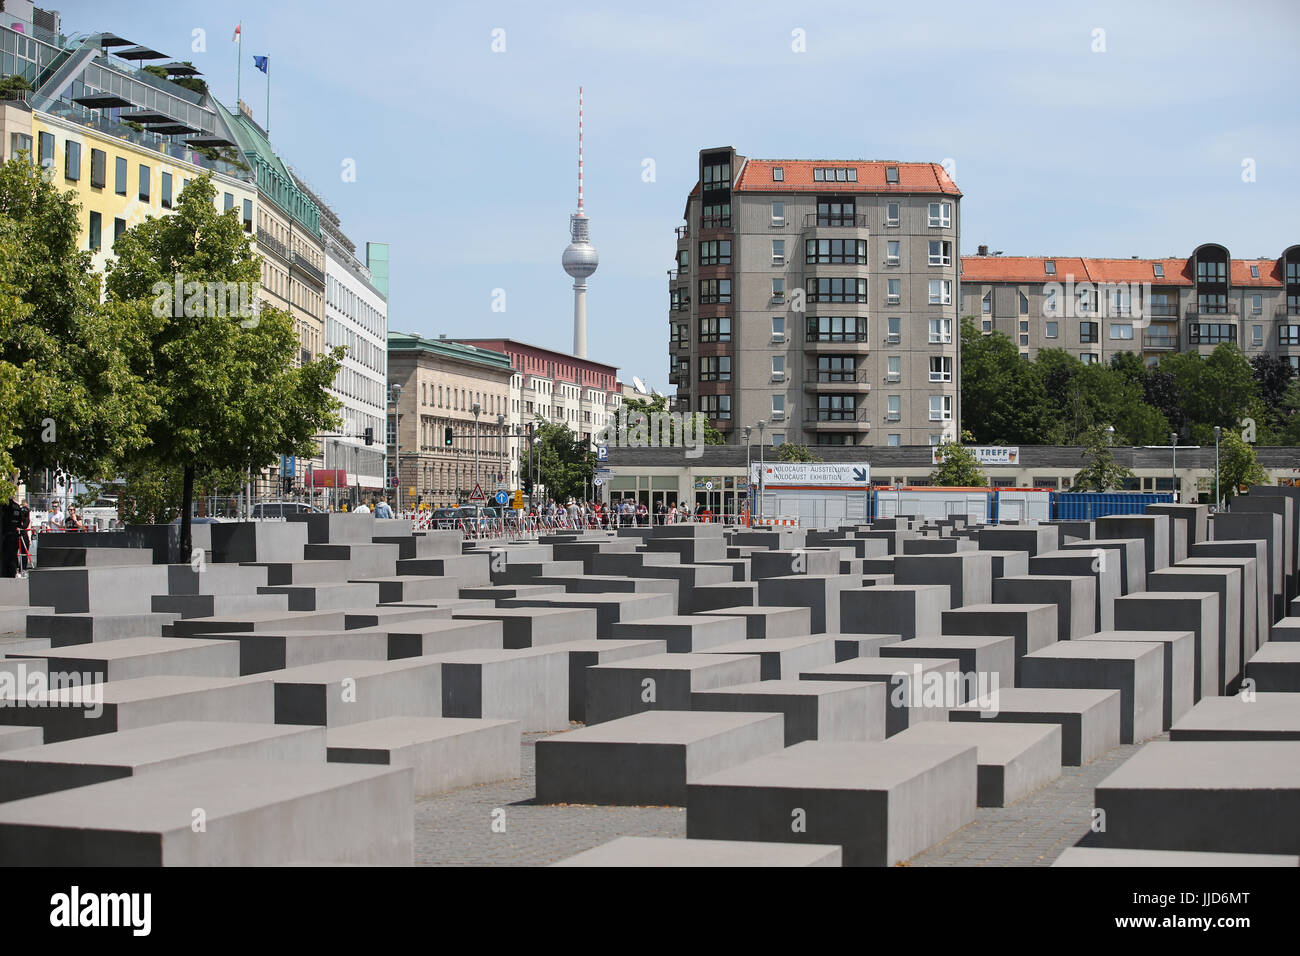 The Memorial to the Murdered Jews of Europe, also known as the Holocaust Memorial, in Berlin, Germany, designed by architect Peter Eisenman and engineer Buro Happold. Stock Photo